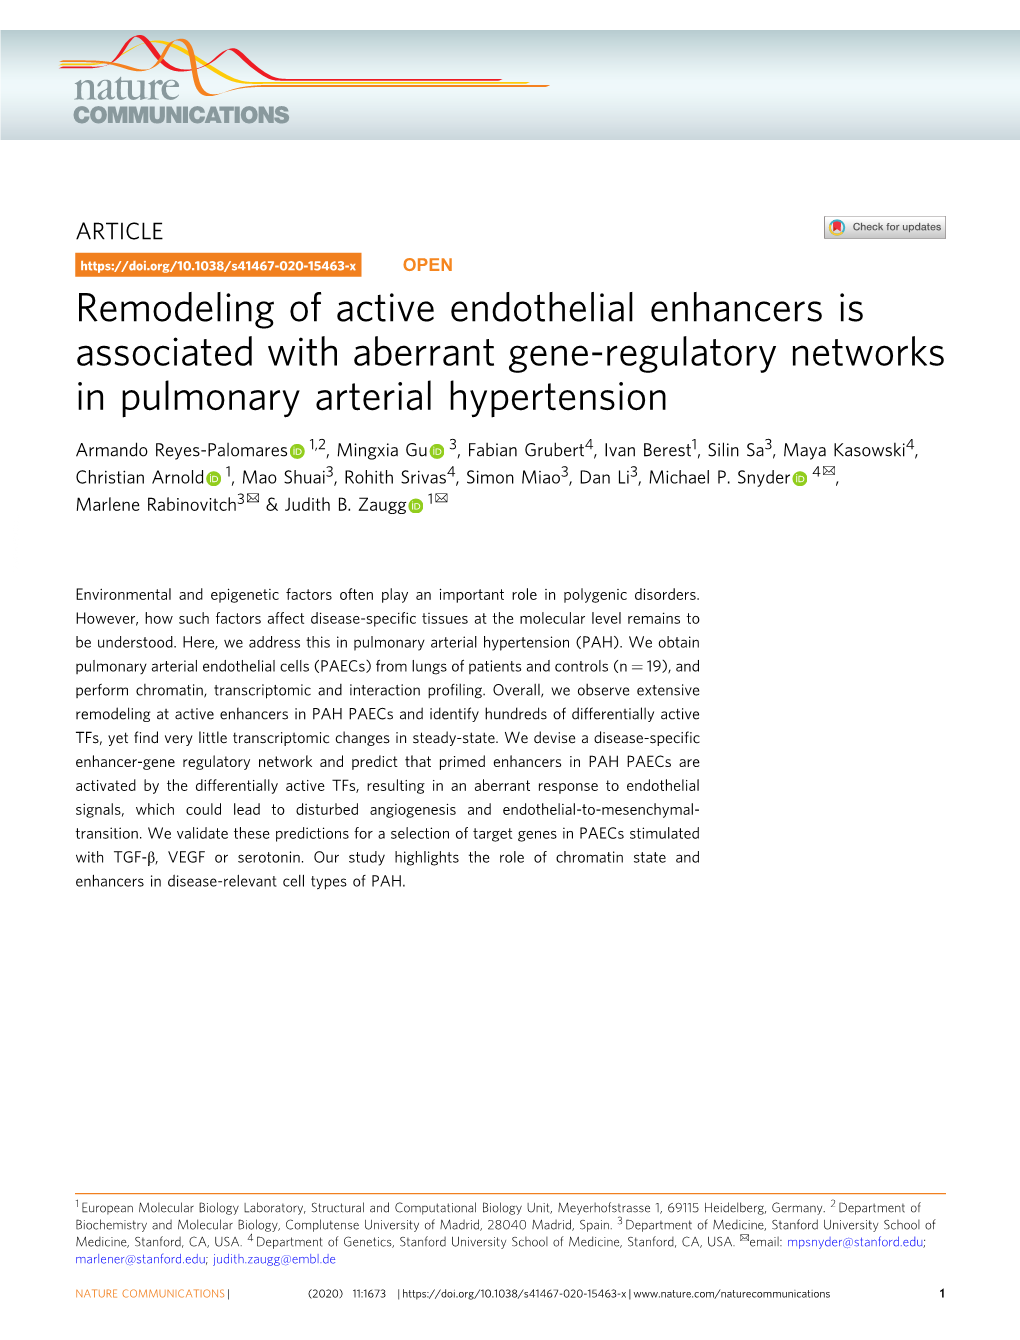 Remodeling of Active Endothelial Enhancers Is Associated with Aberrant Gene-Regulatory Networks in Pulmonary Arterial Hypertension